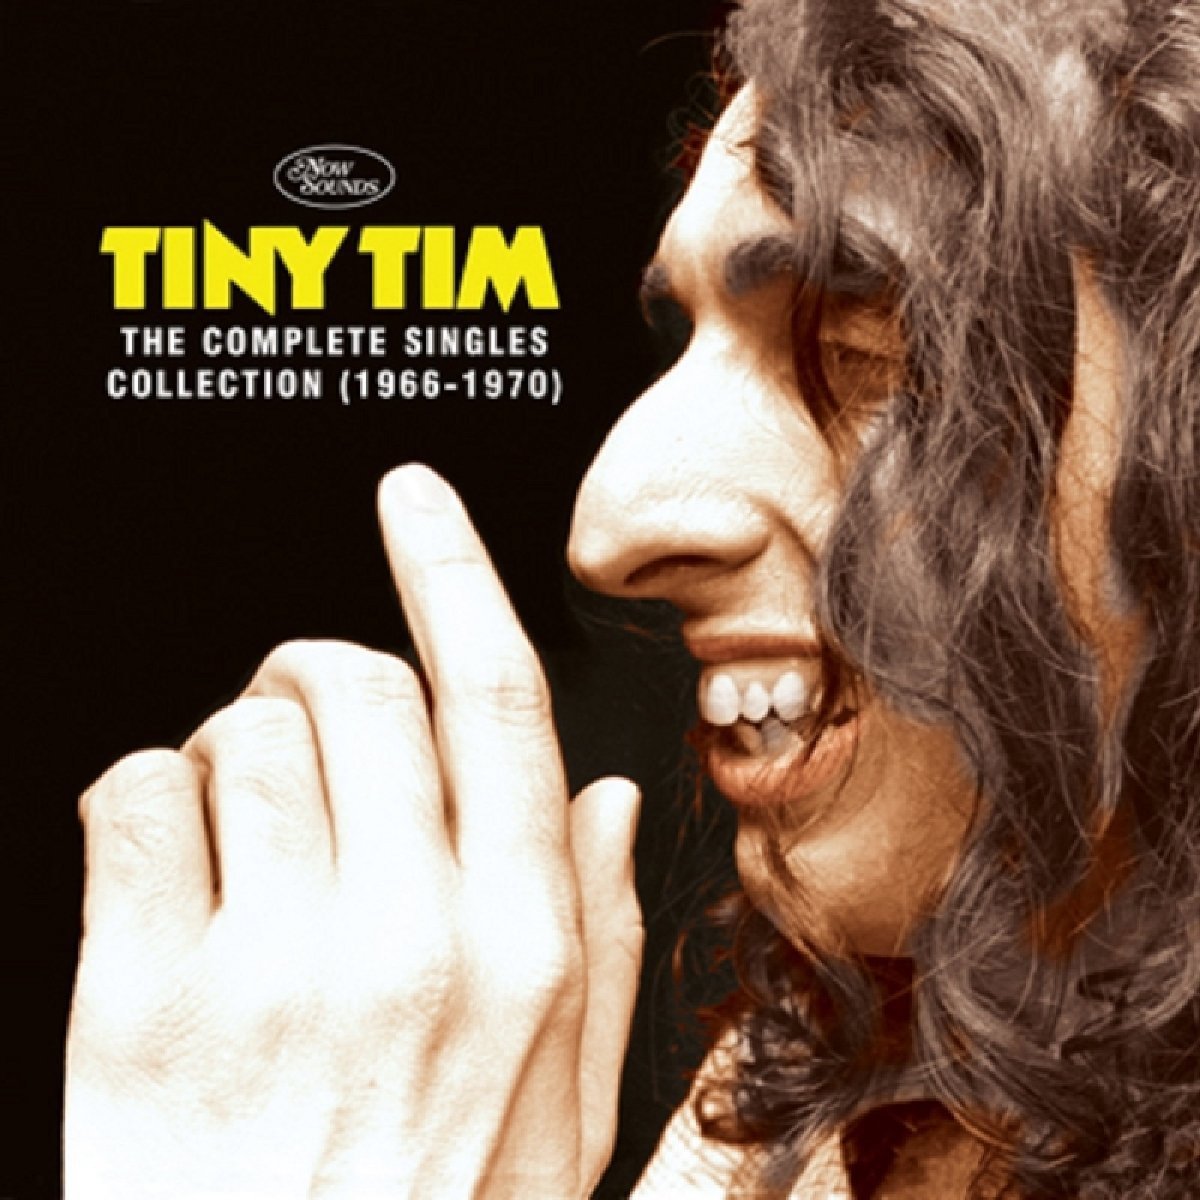 Fill Your Heart Now Sounds Collects Tiny Tim’s Singles (1966